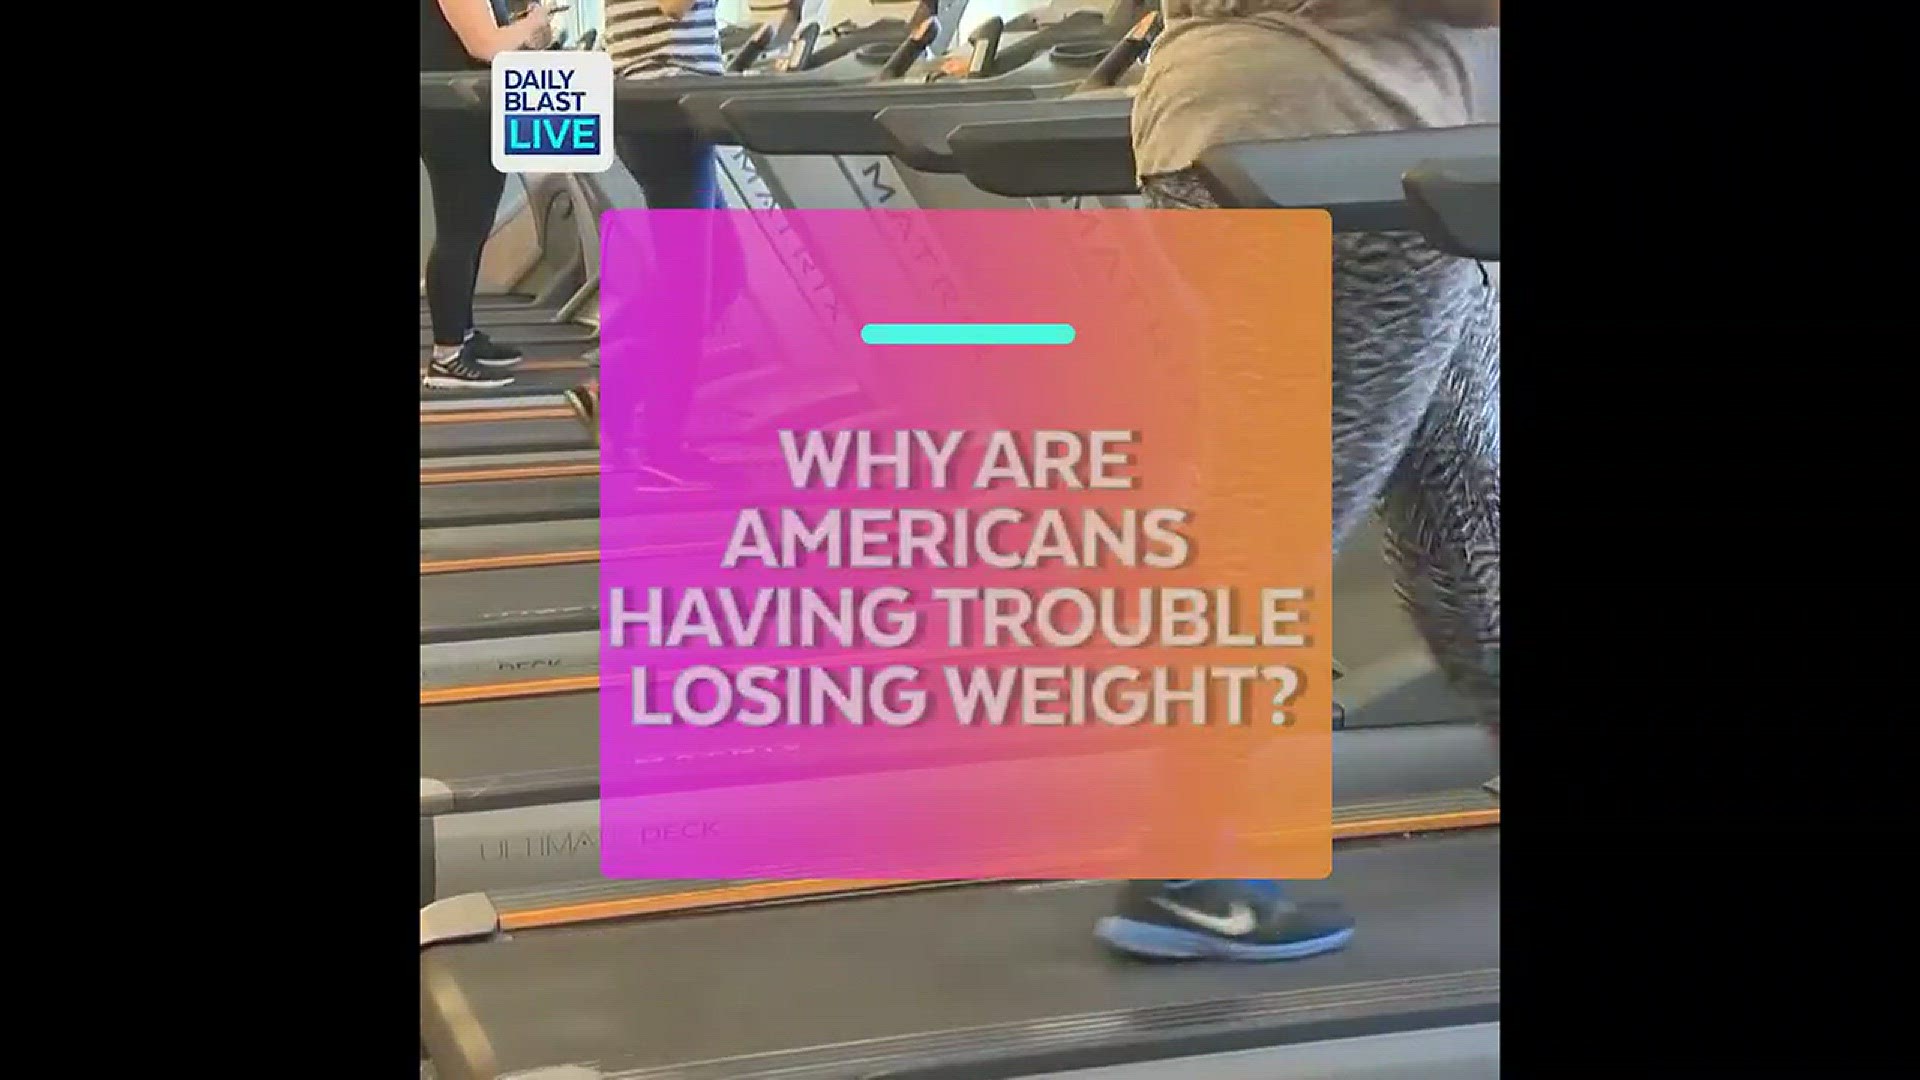 Weight loss is getting harder for people - here's why.